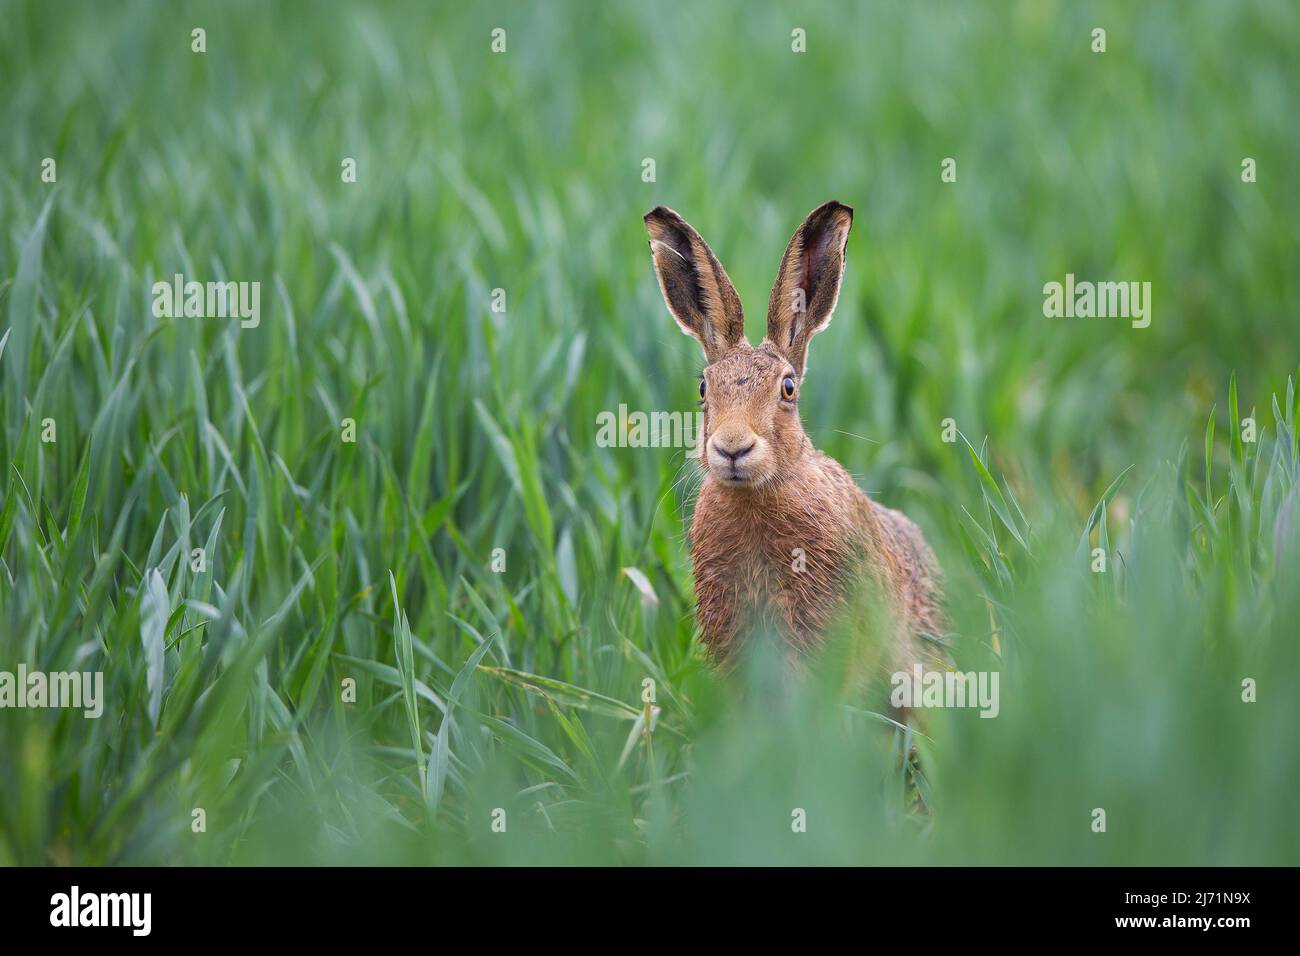 Front view of a wild European brown hare (Lepus europaeus) on alert with ears pricked up in long grass of UK countryside. Stock Photo